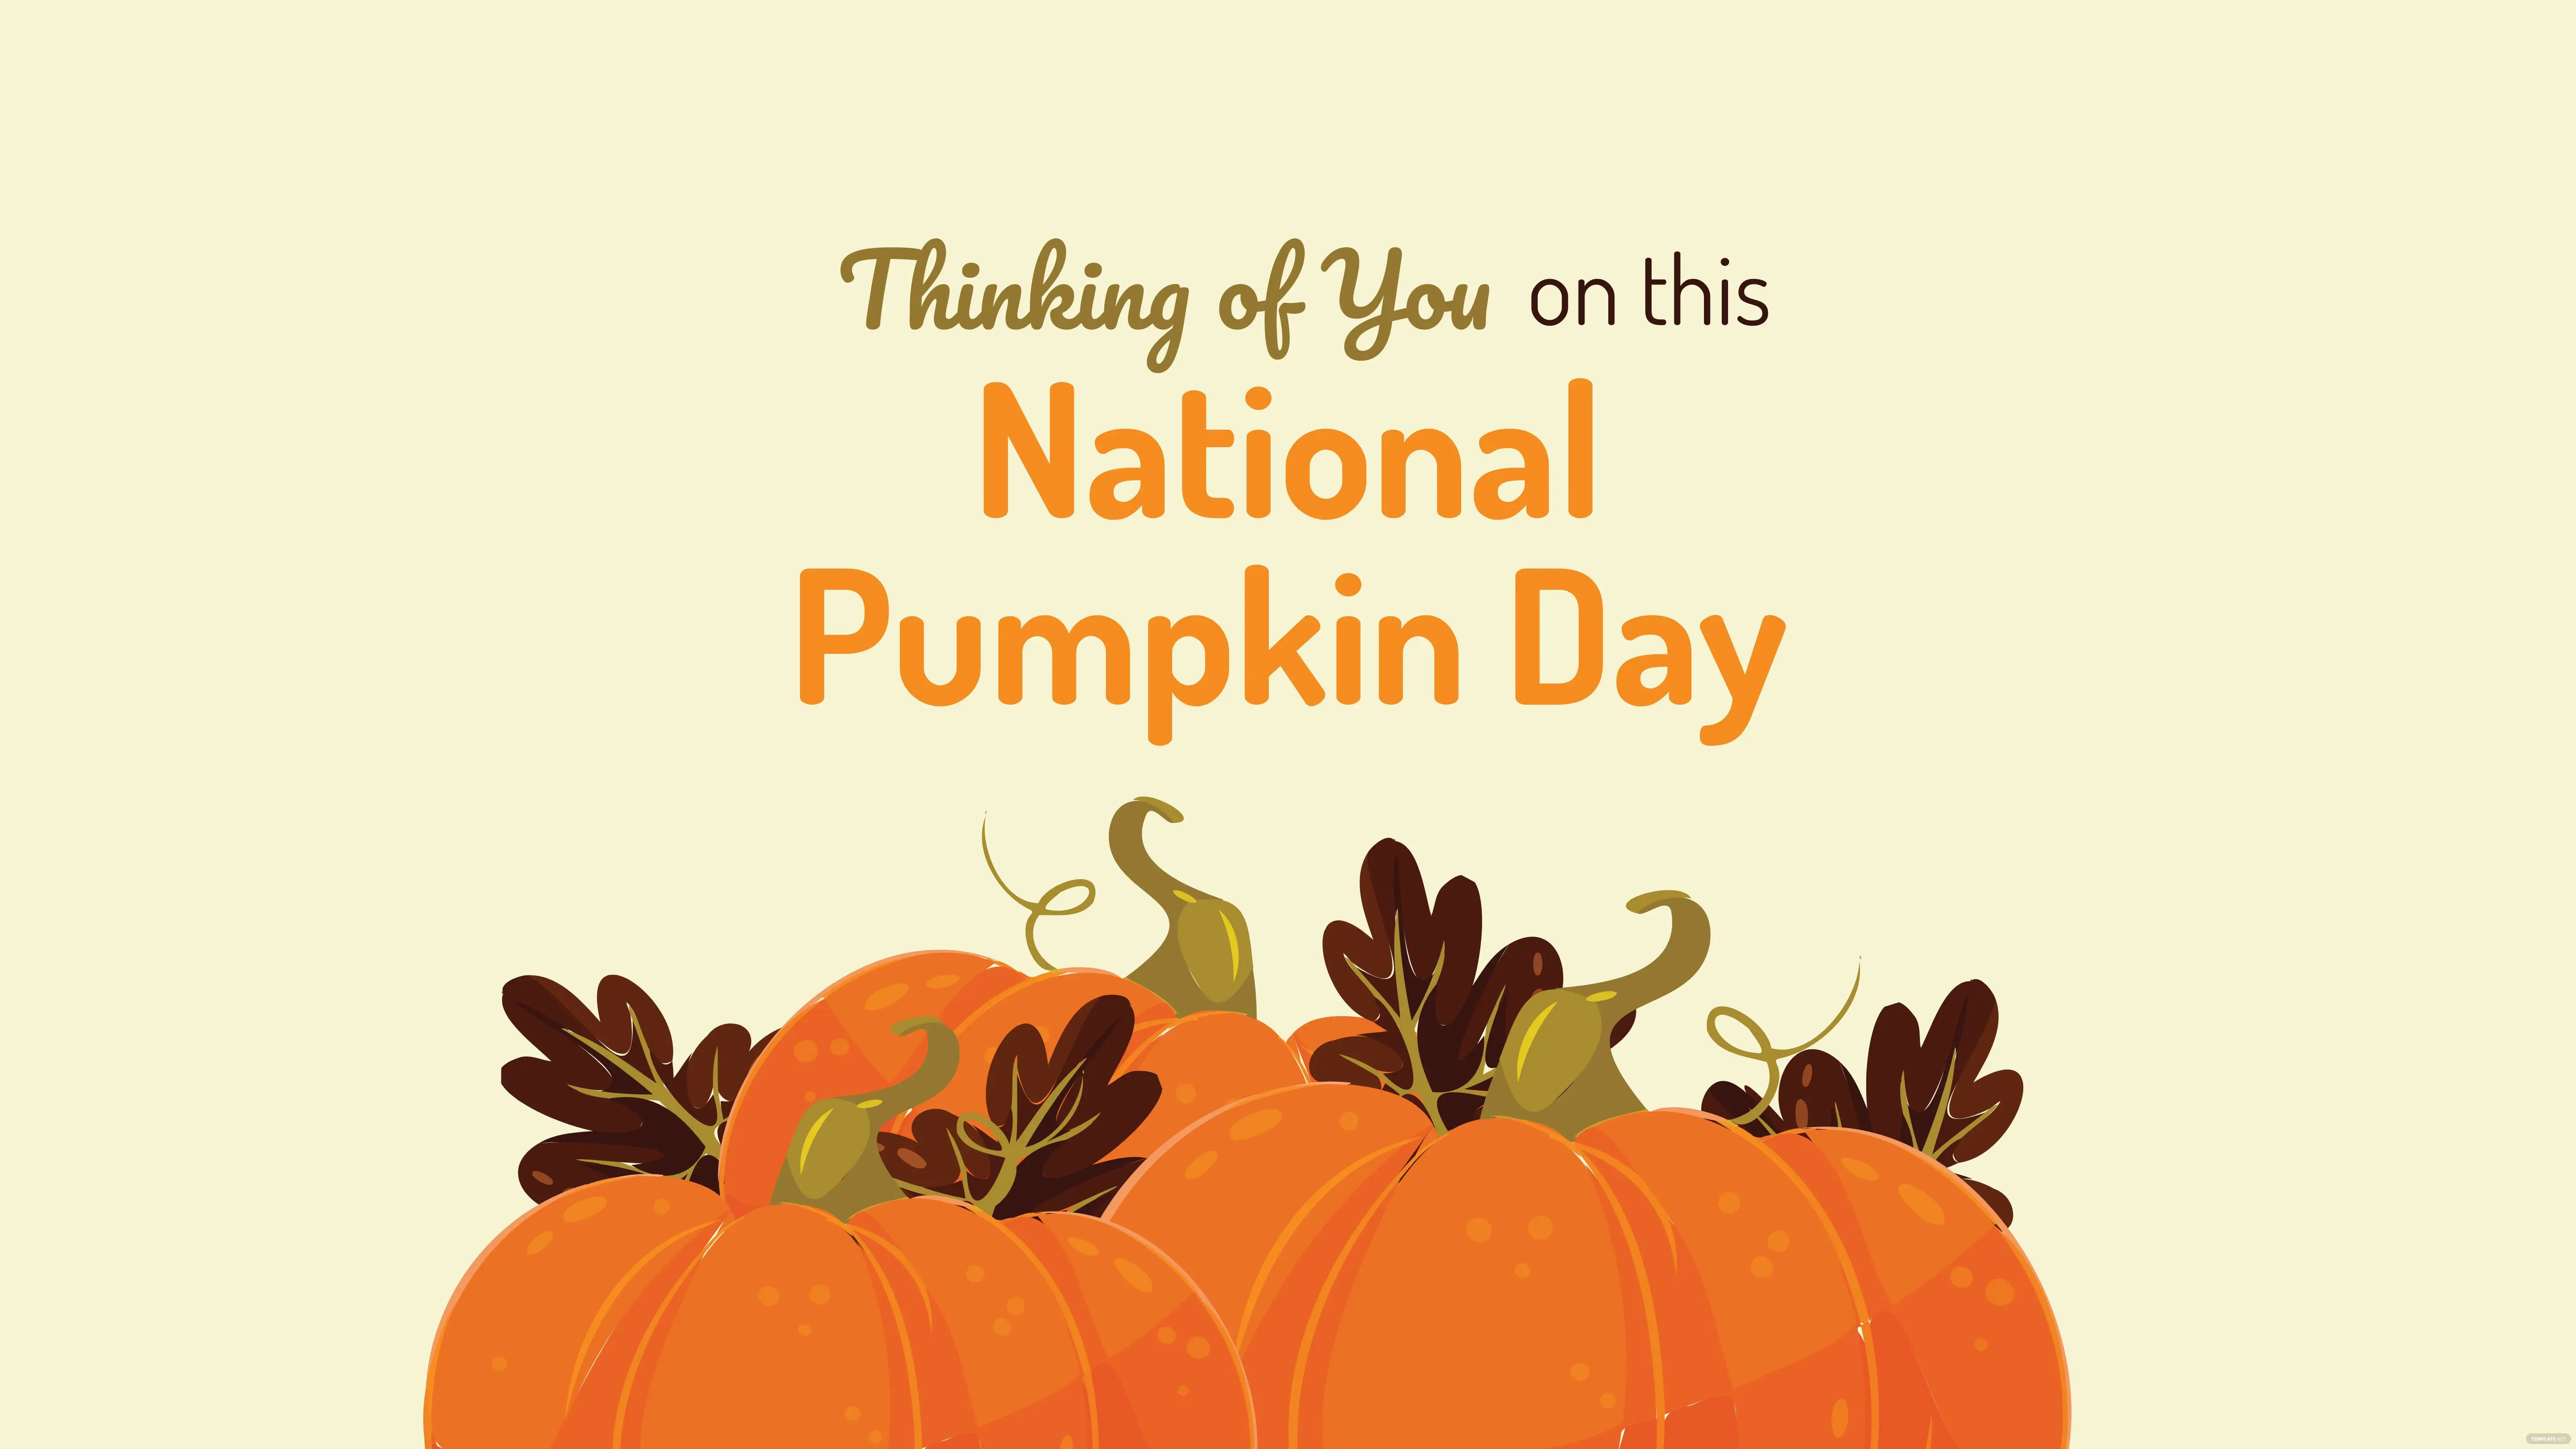 national pumpkin day greeting card background ideas examples